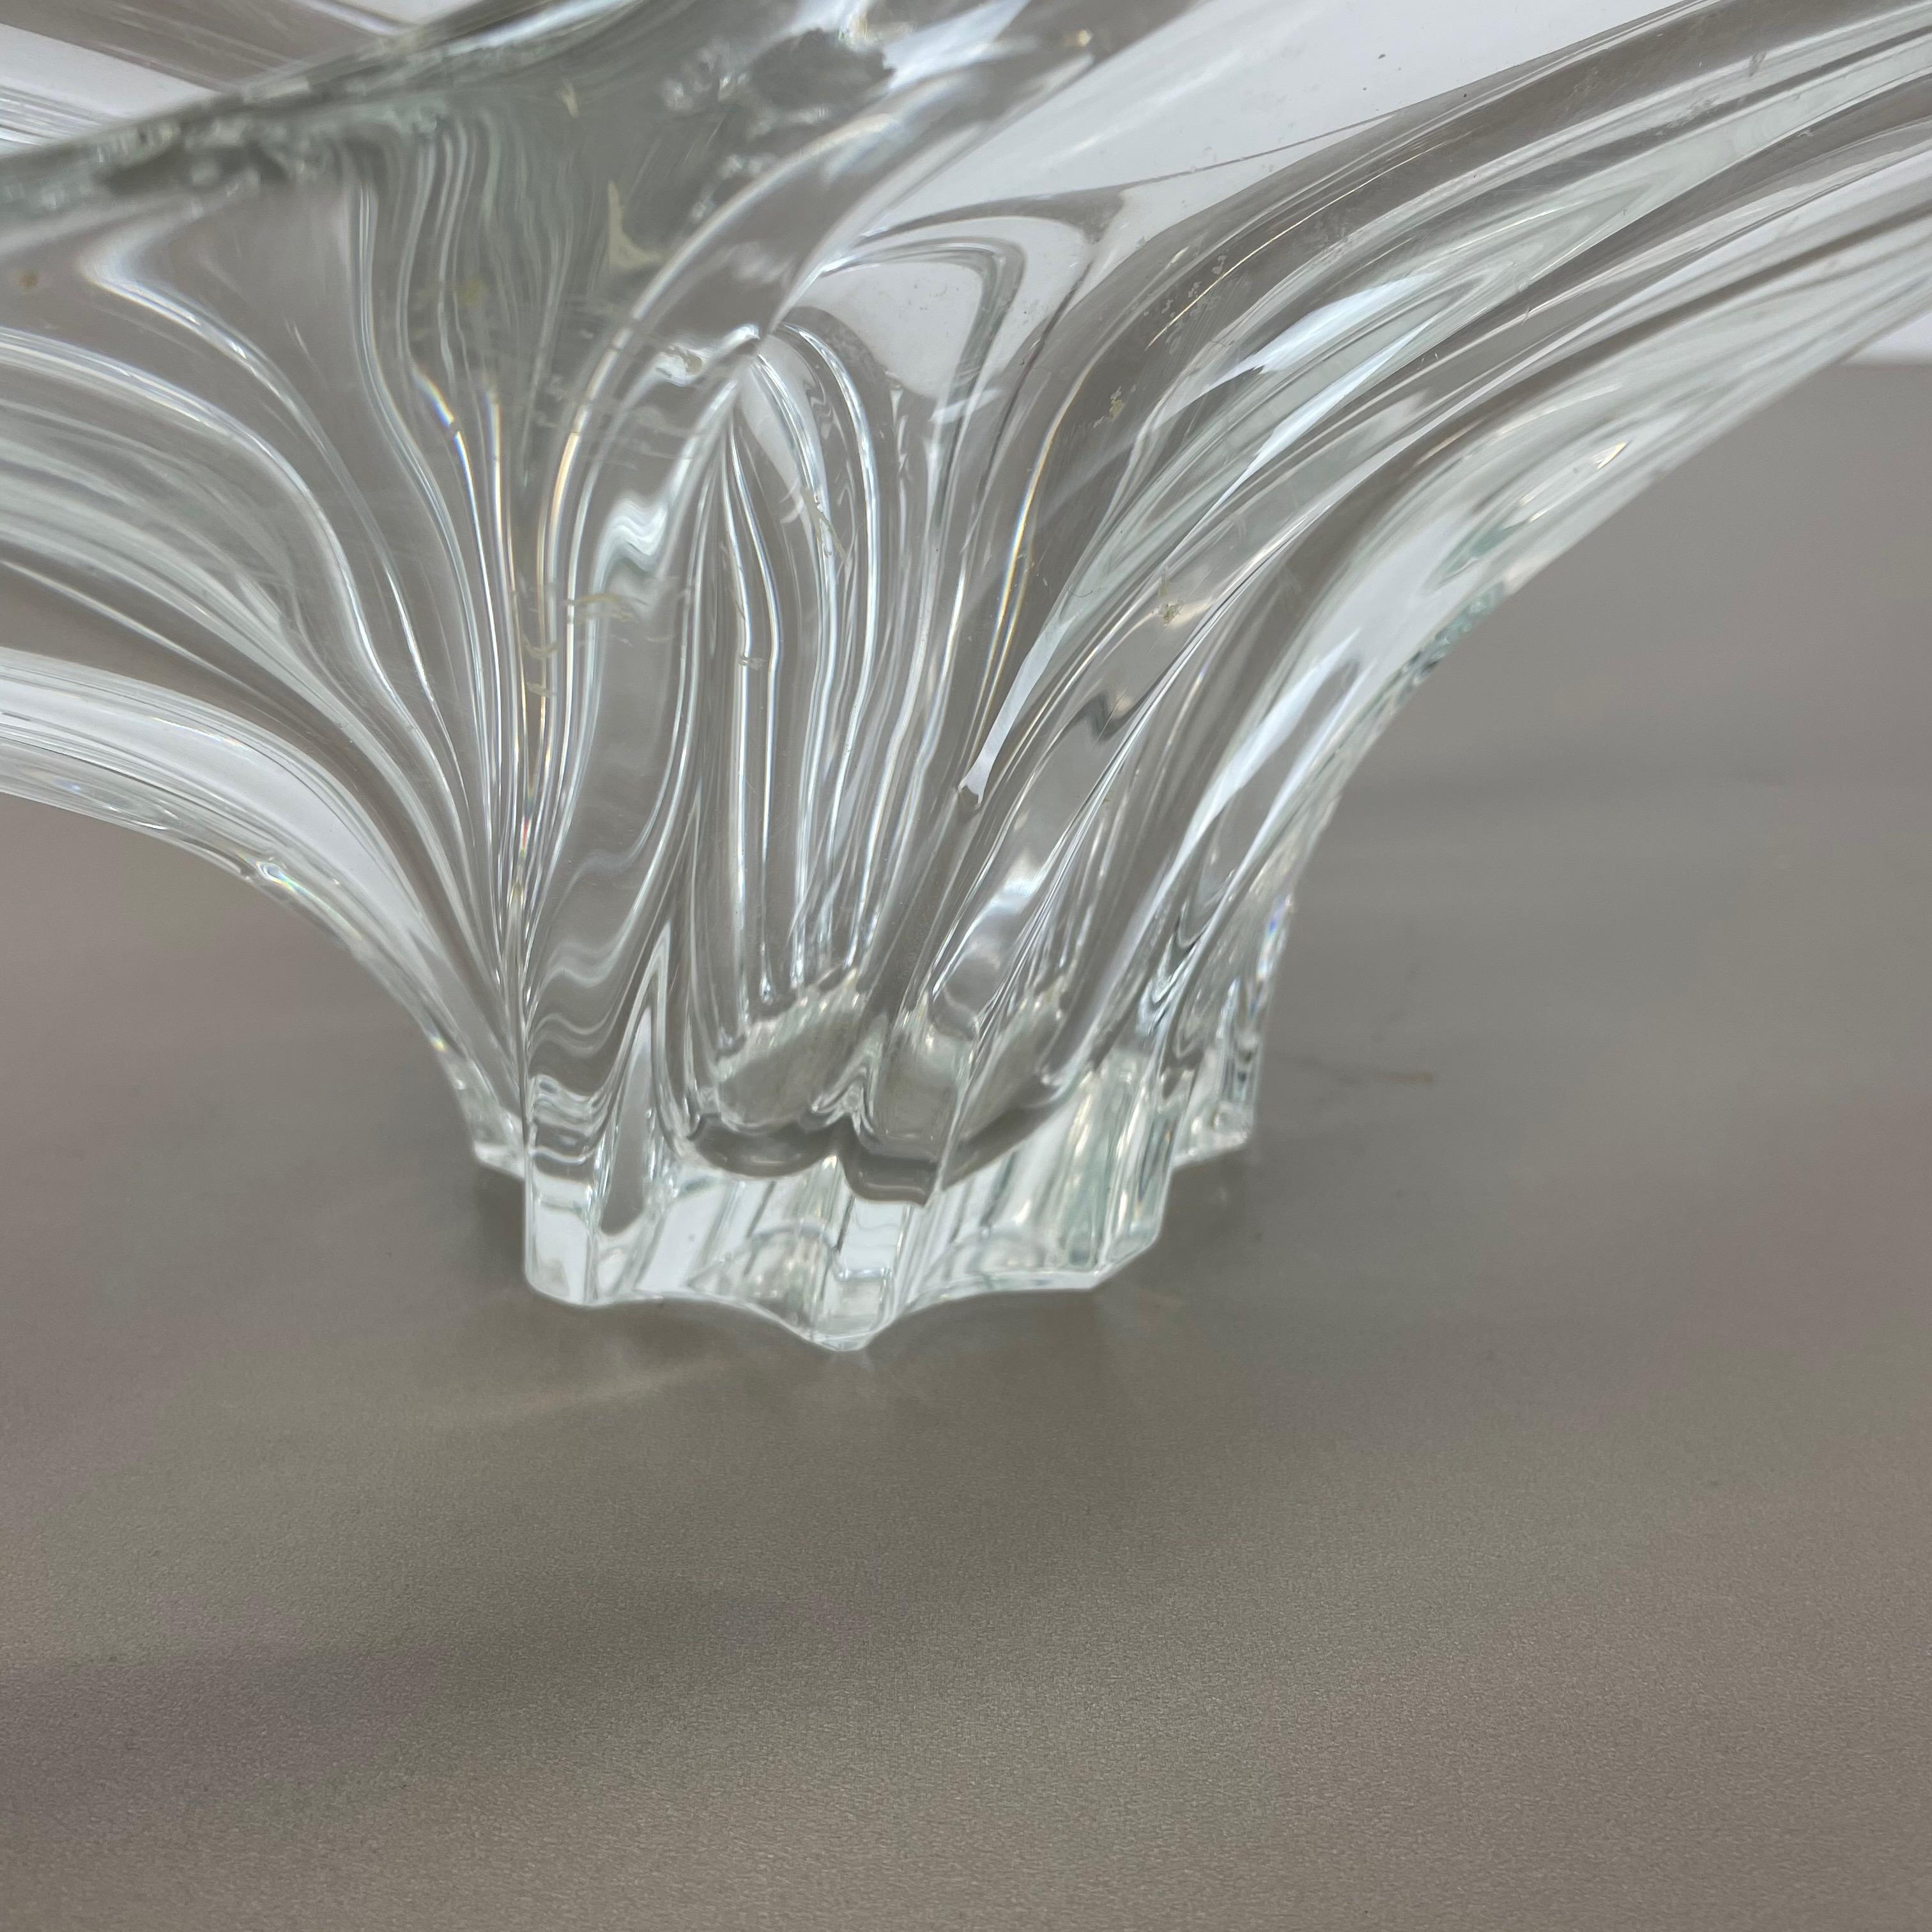 Large Floral Crystal Glass Centerpiece Shell Bowl by Art Vannes, France, 1970 For Sale 5